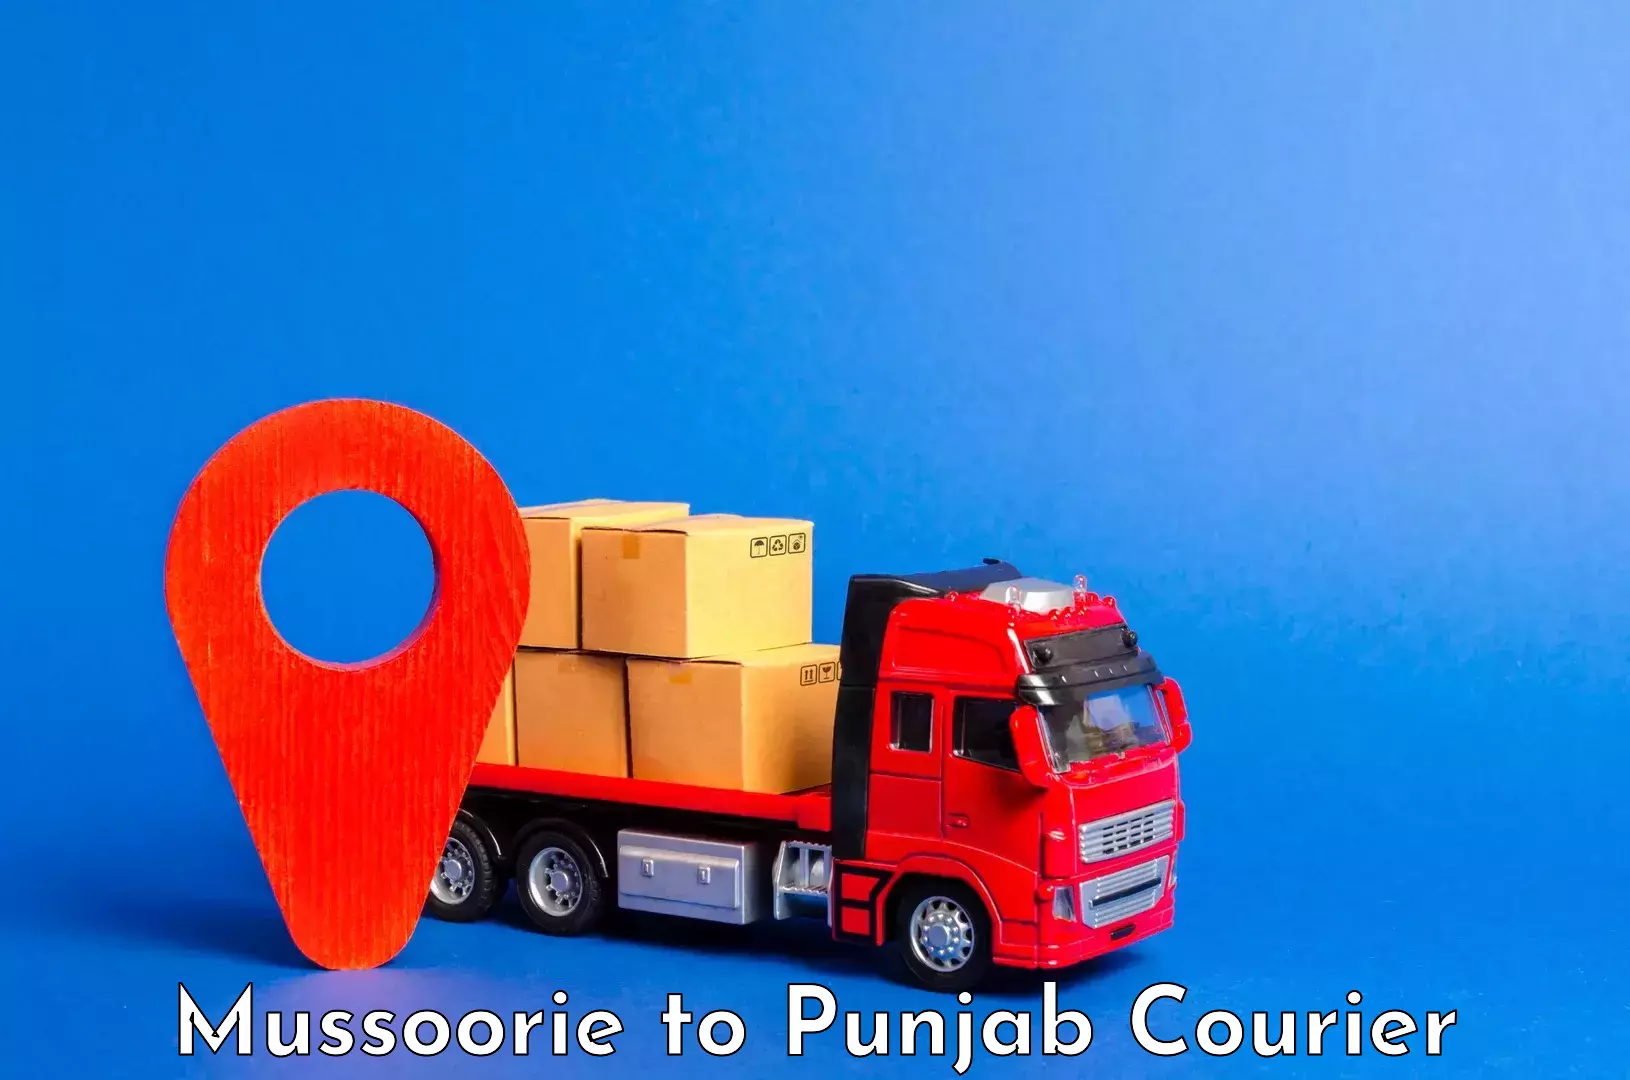 Luggage shipment strategy Mussoorie to Punjab